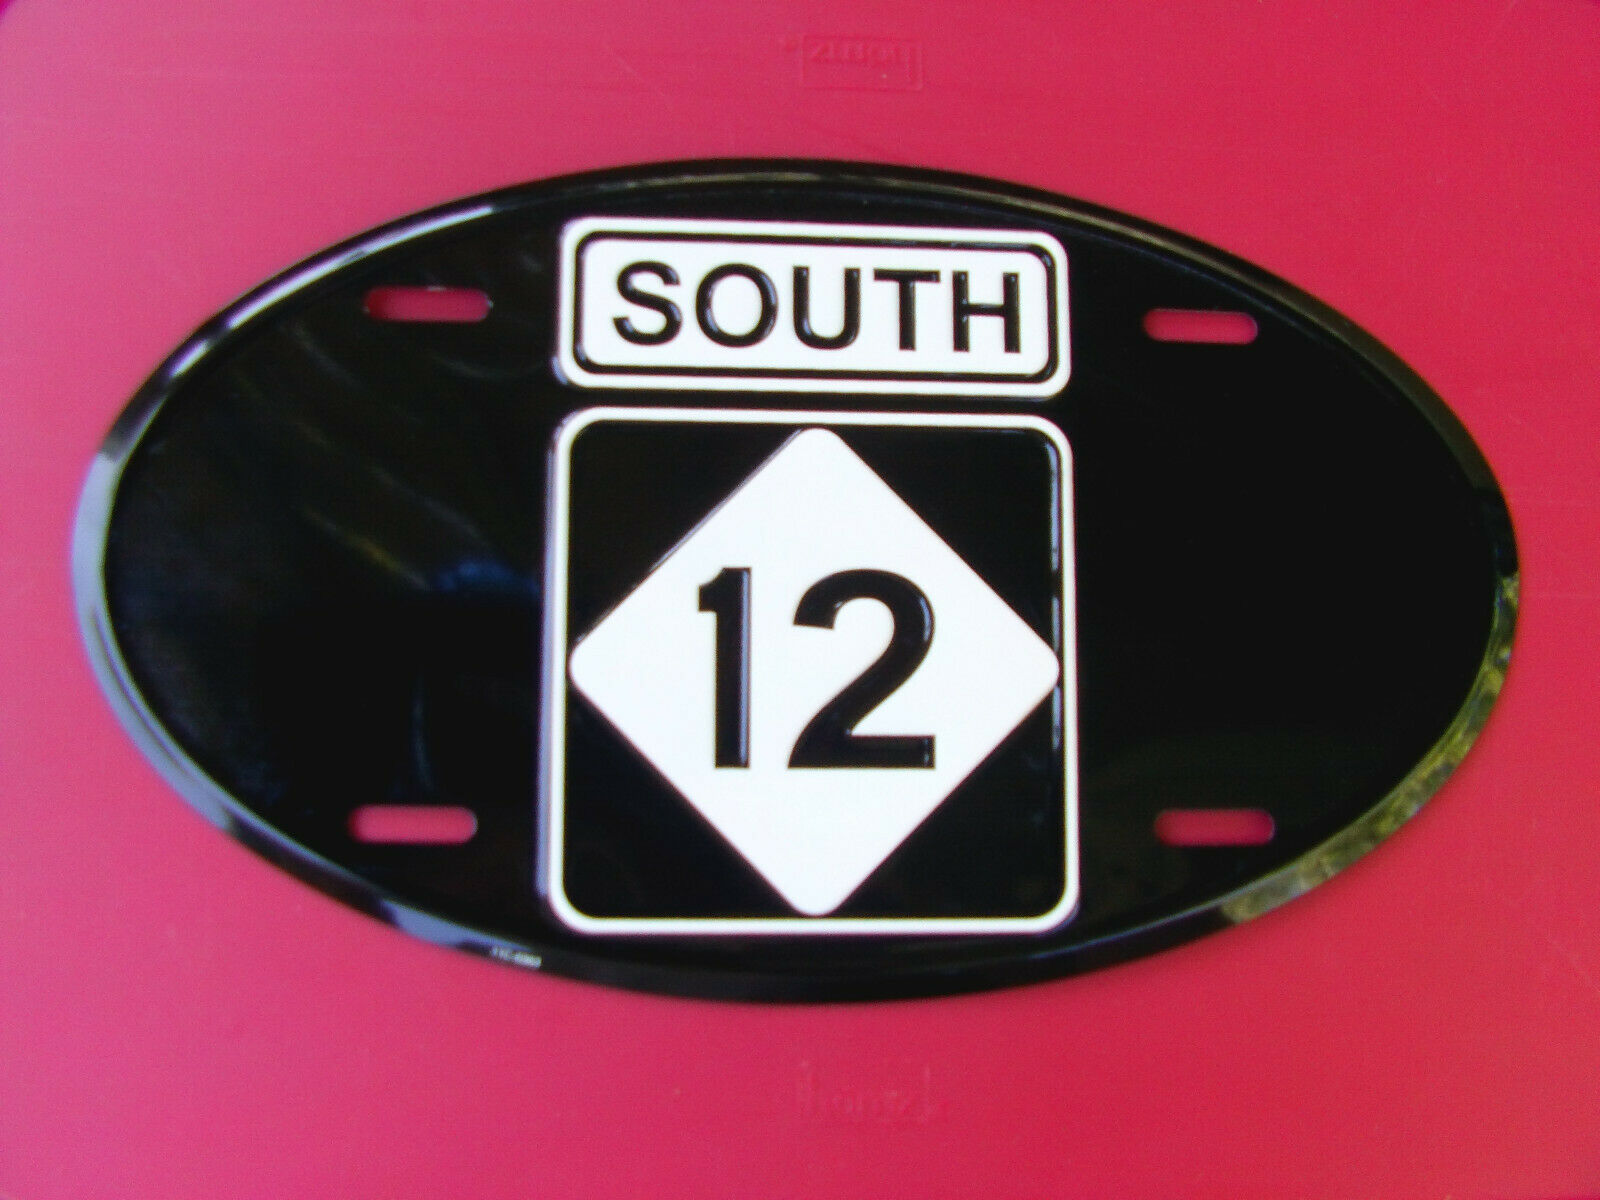 Obx Specialty: "south" "12" Oval Black Metal Front Plate! Mint Condition!